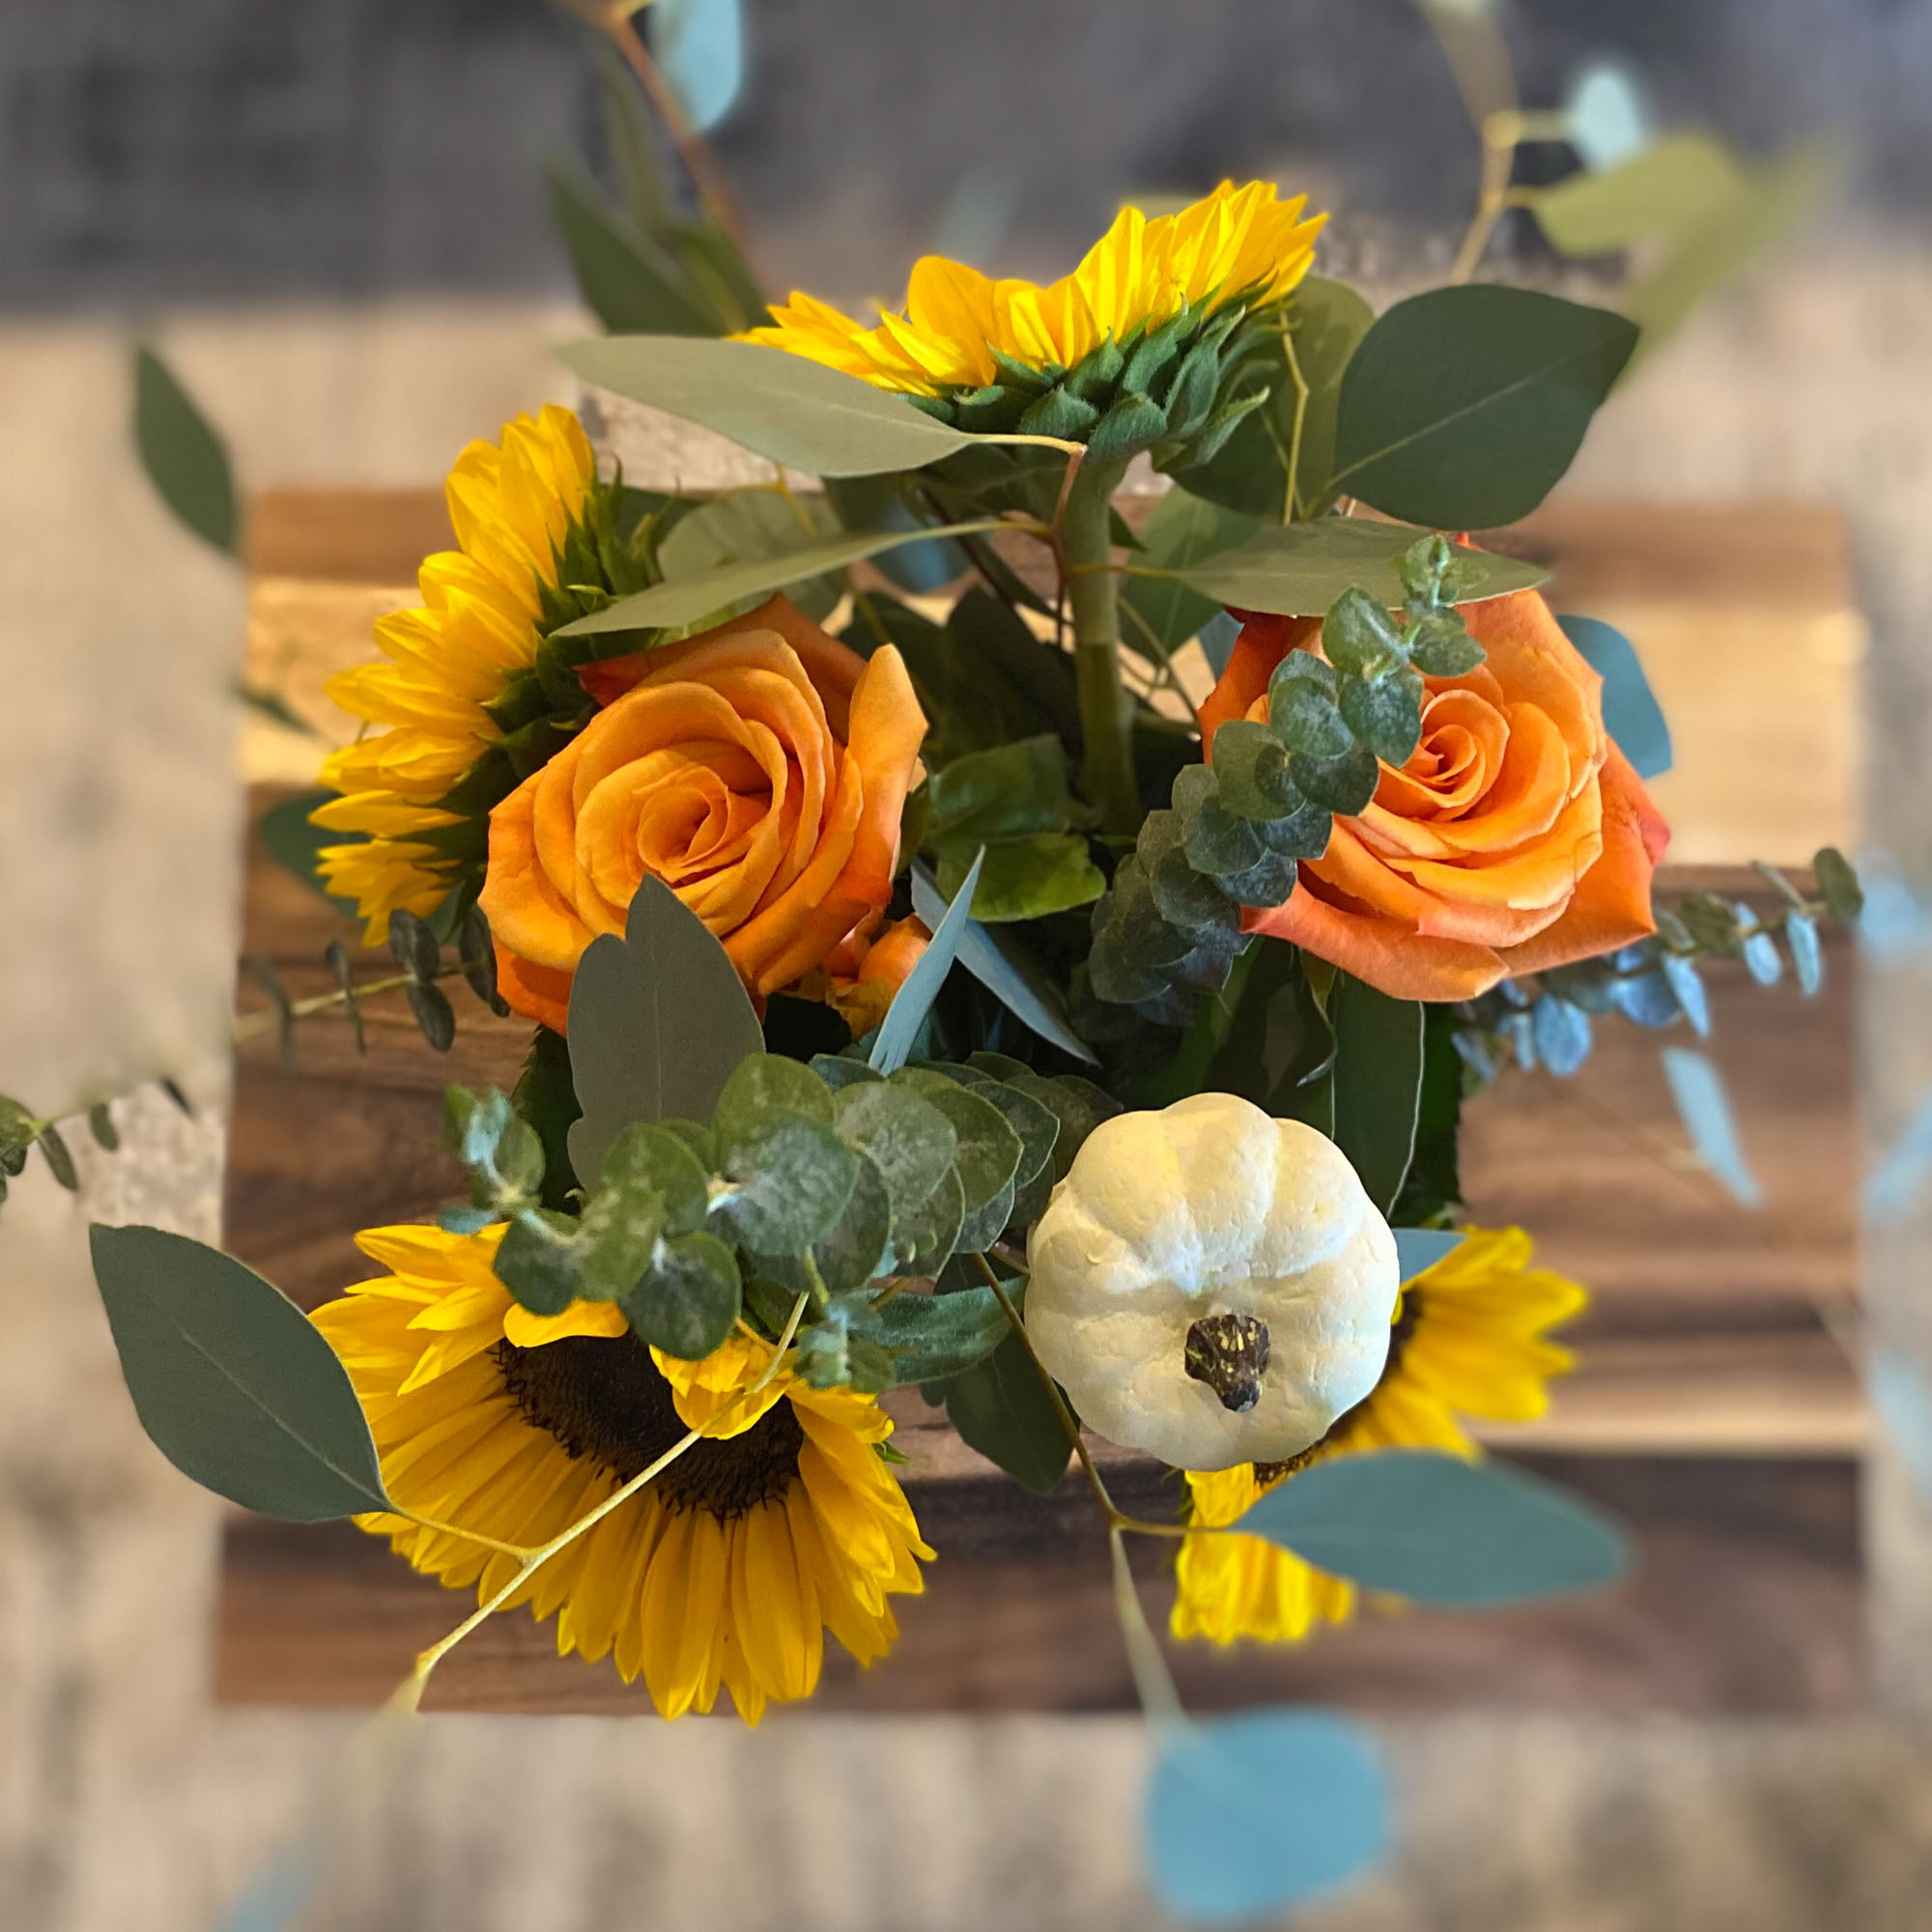 Overhead shot of a flower arrangement in a glass vase on a wooden coffee table, with sunflowers and pumpkins.